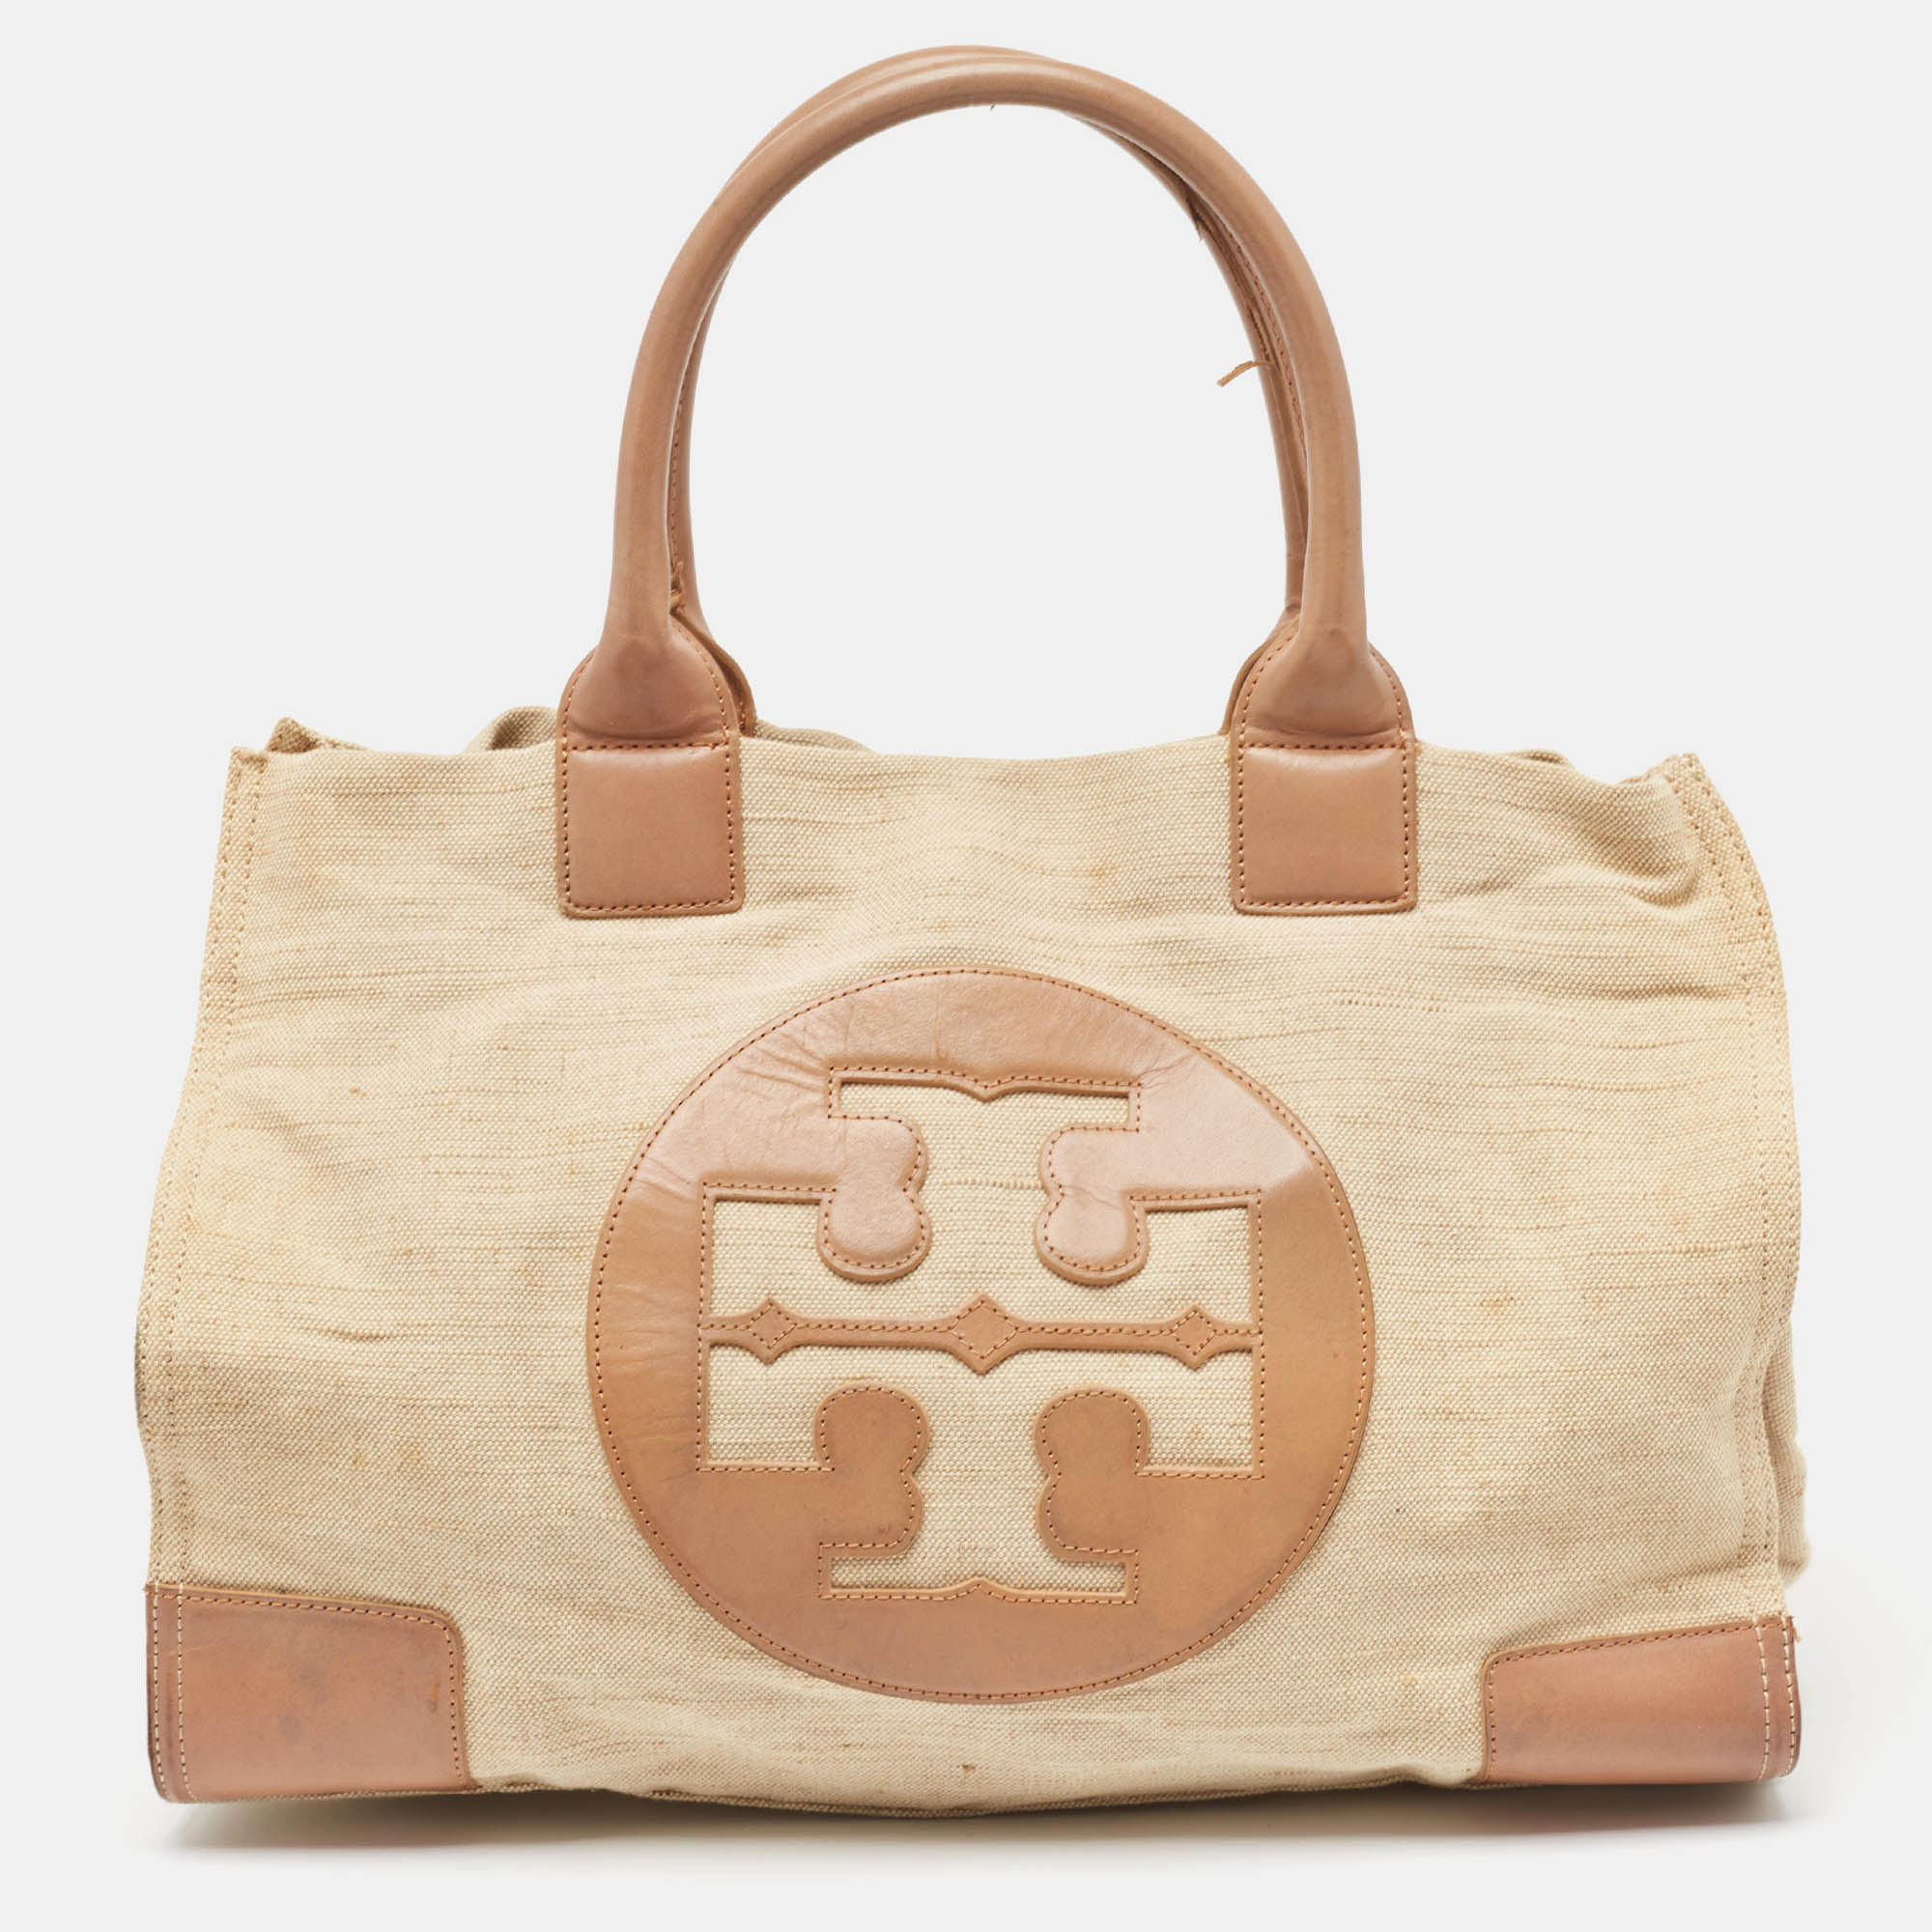 Tory burch natural/beige canvas and leather large ella tote